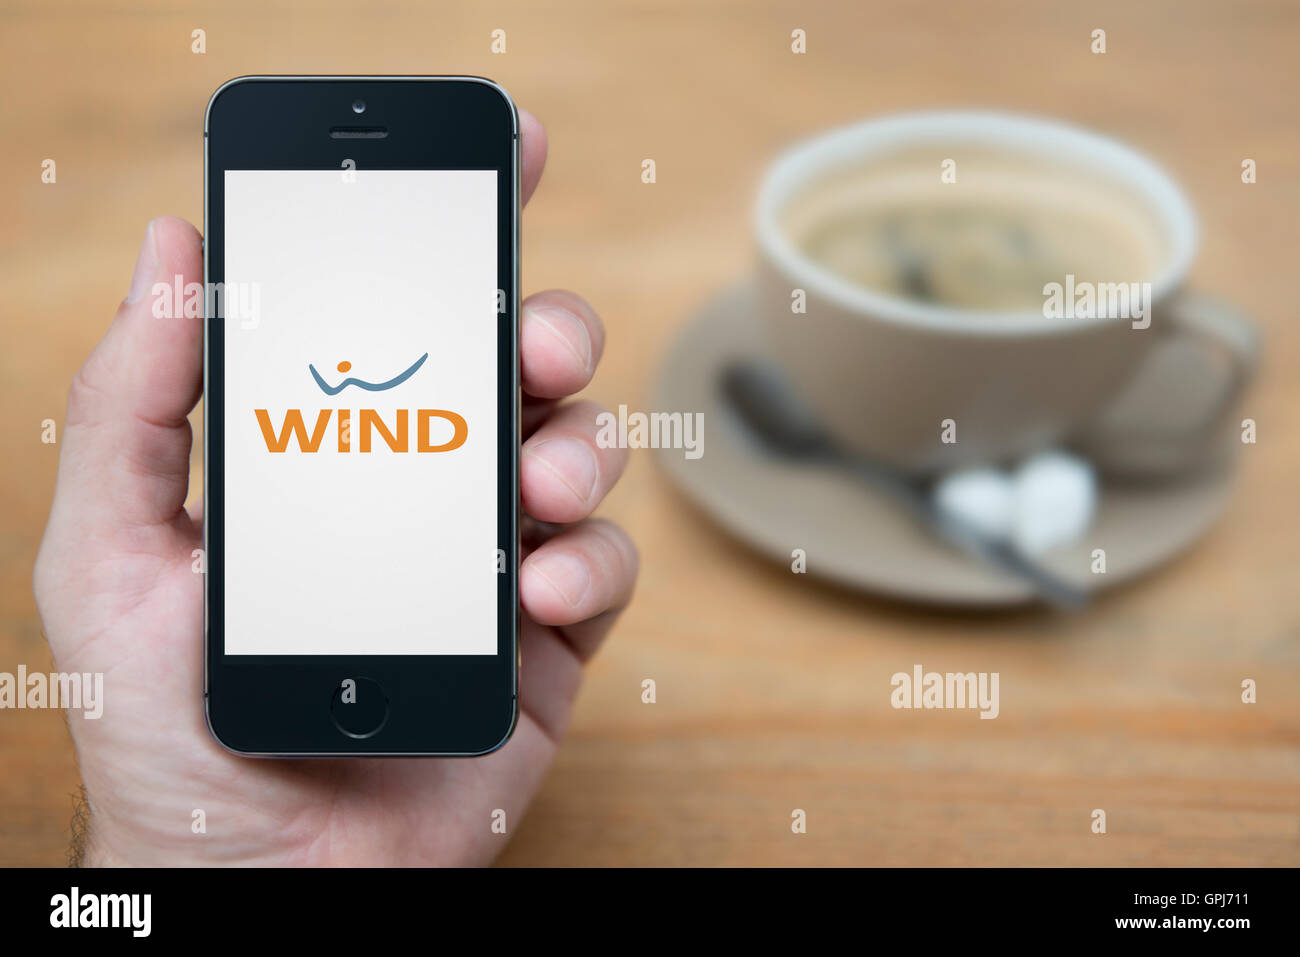 A man looks at his iPhone which displays the Wind telecommunications operator logo, with a cup of coffee (Editorial use only). Stock Photo